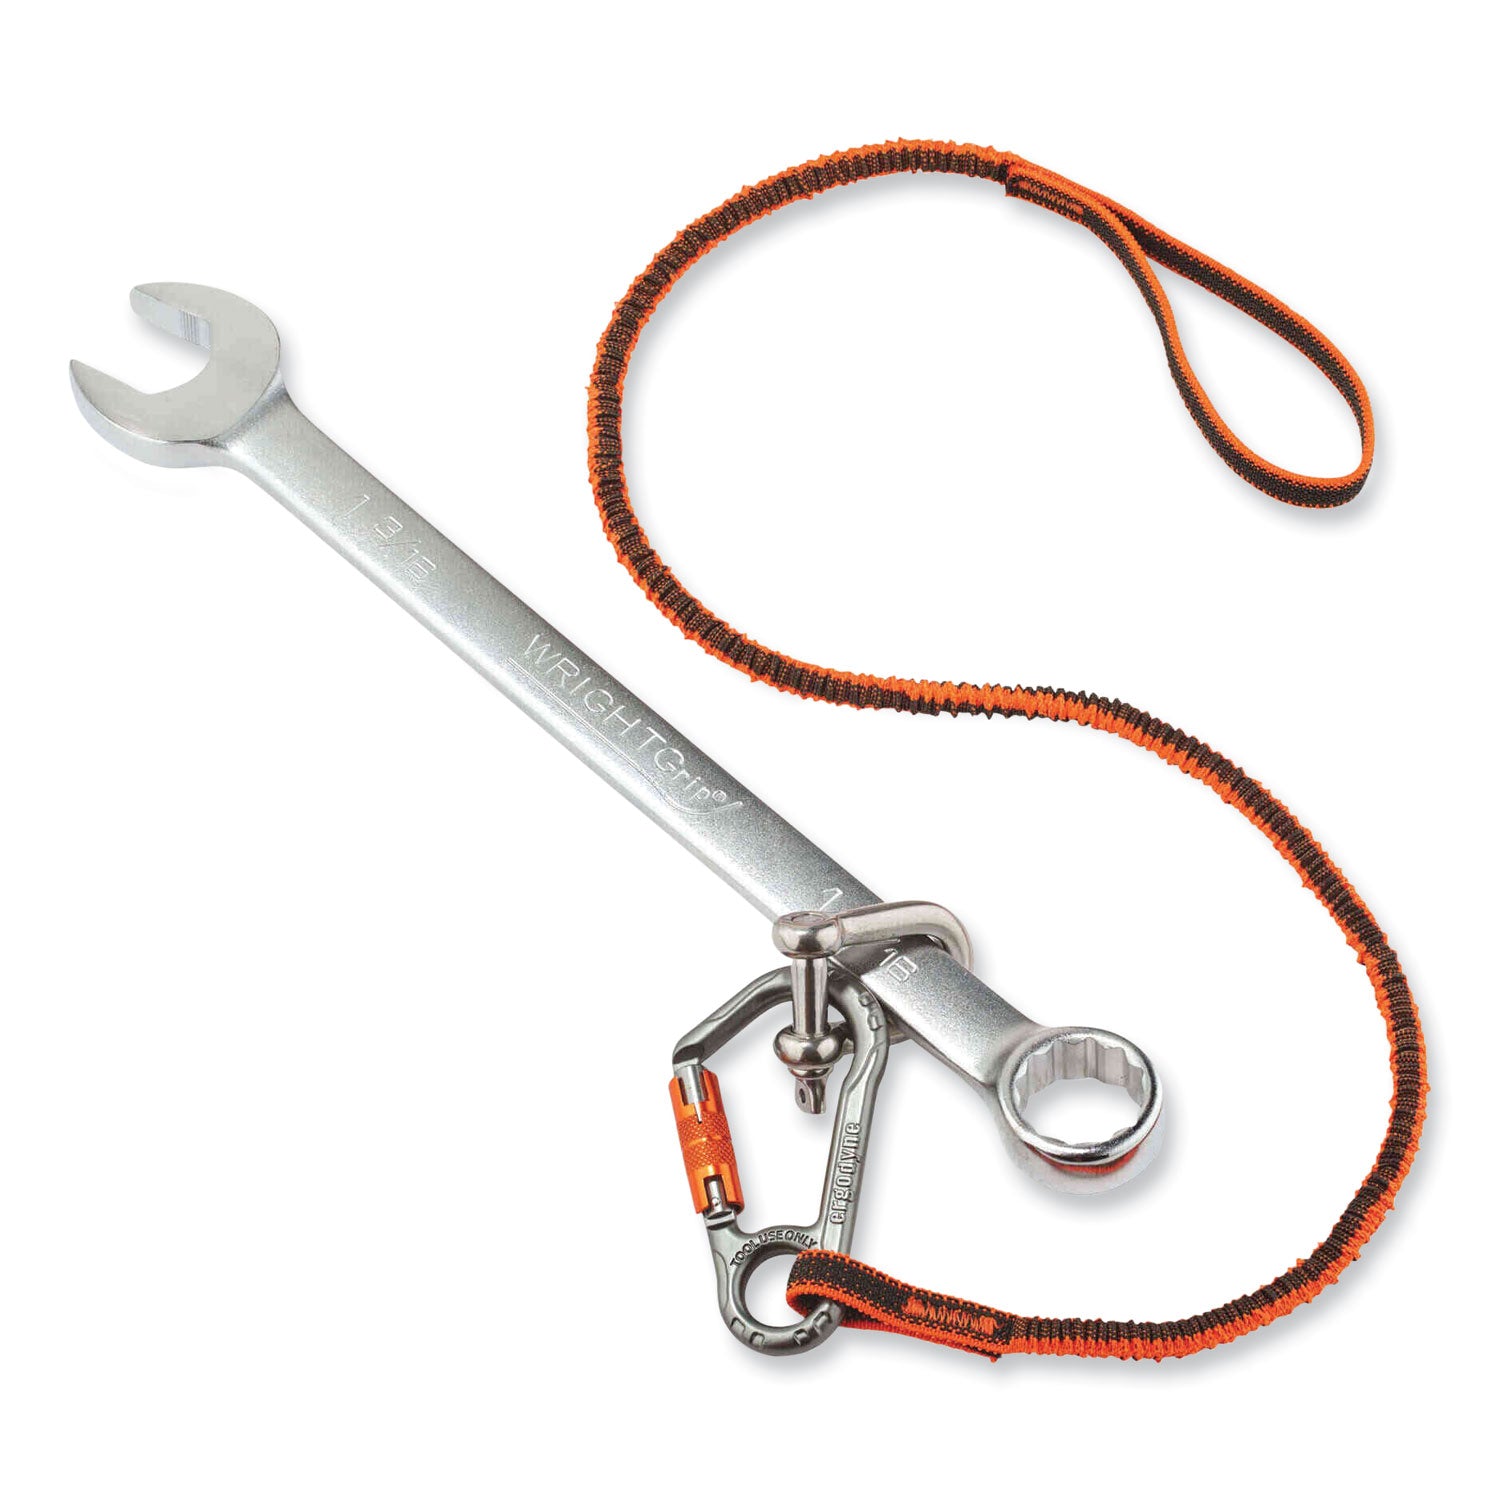 squids-3108fxtool-lanyard-w-locking-aluminum-carabiner+loop-15lb-max-work-cap-38-to-48or-gyships-in-1-3-business-days_ego19808 - 6